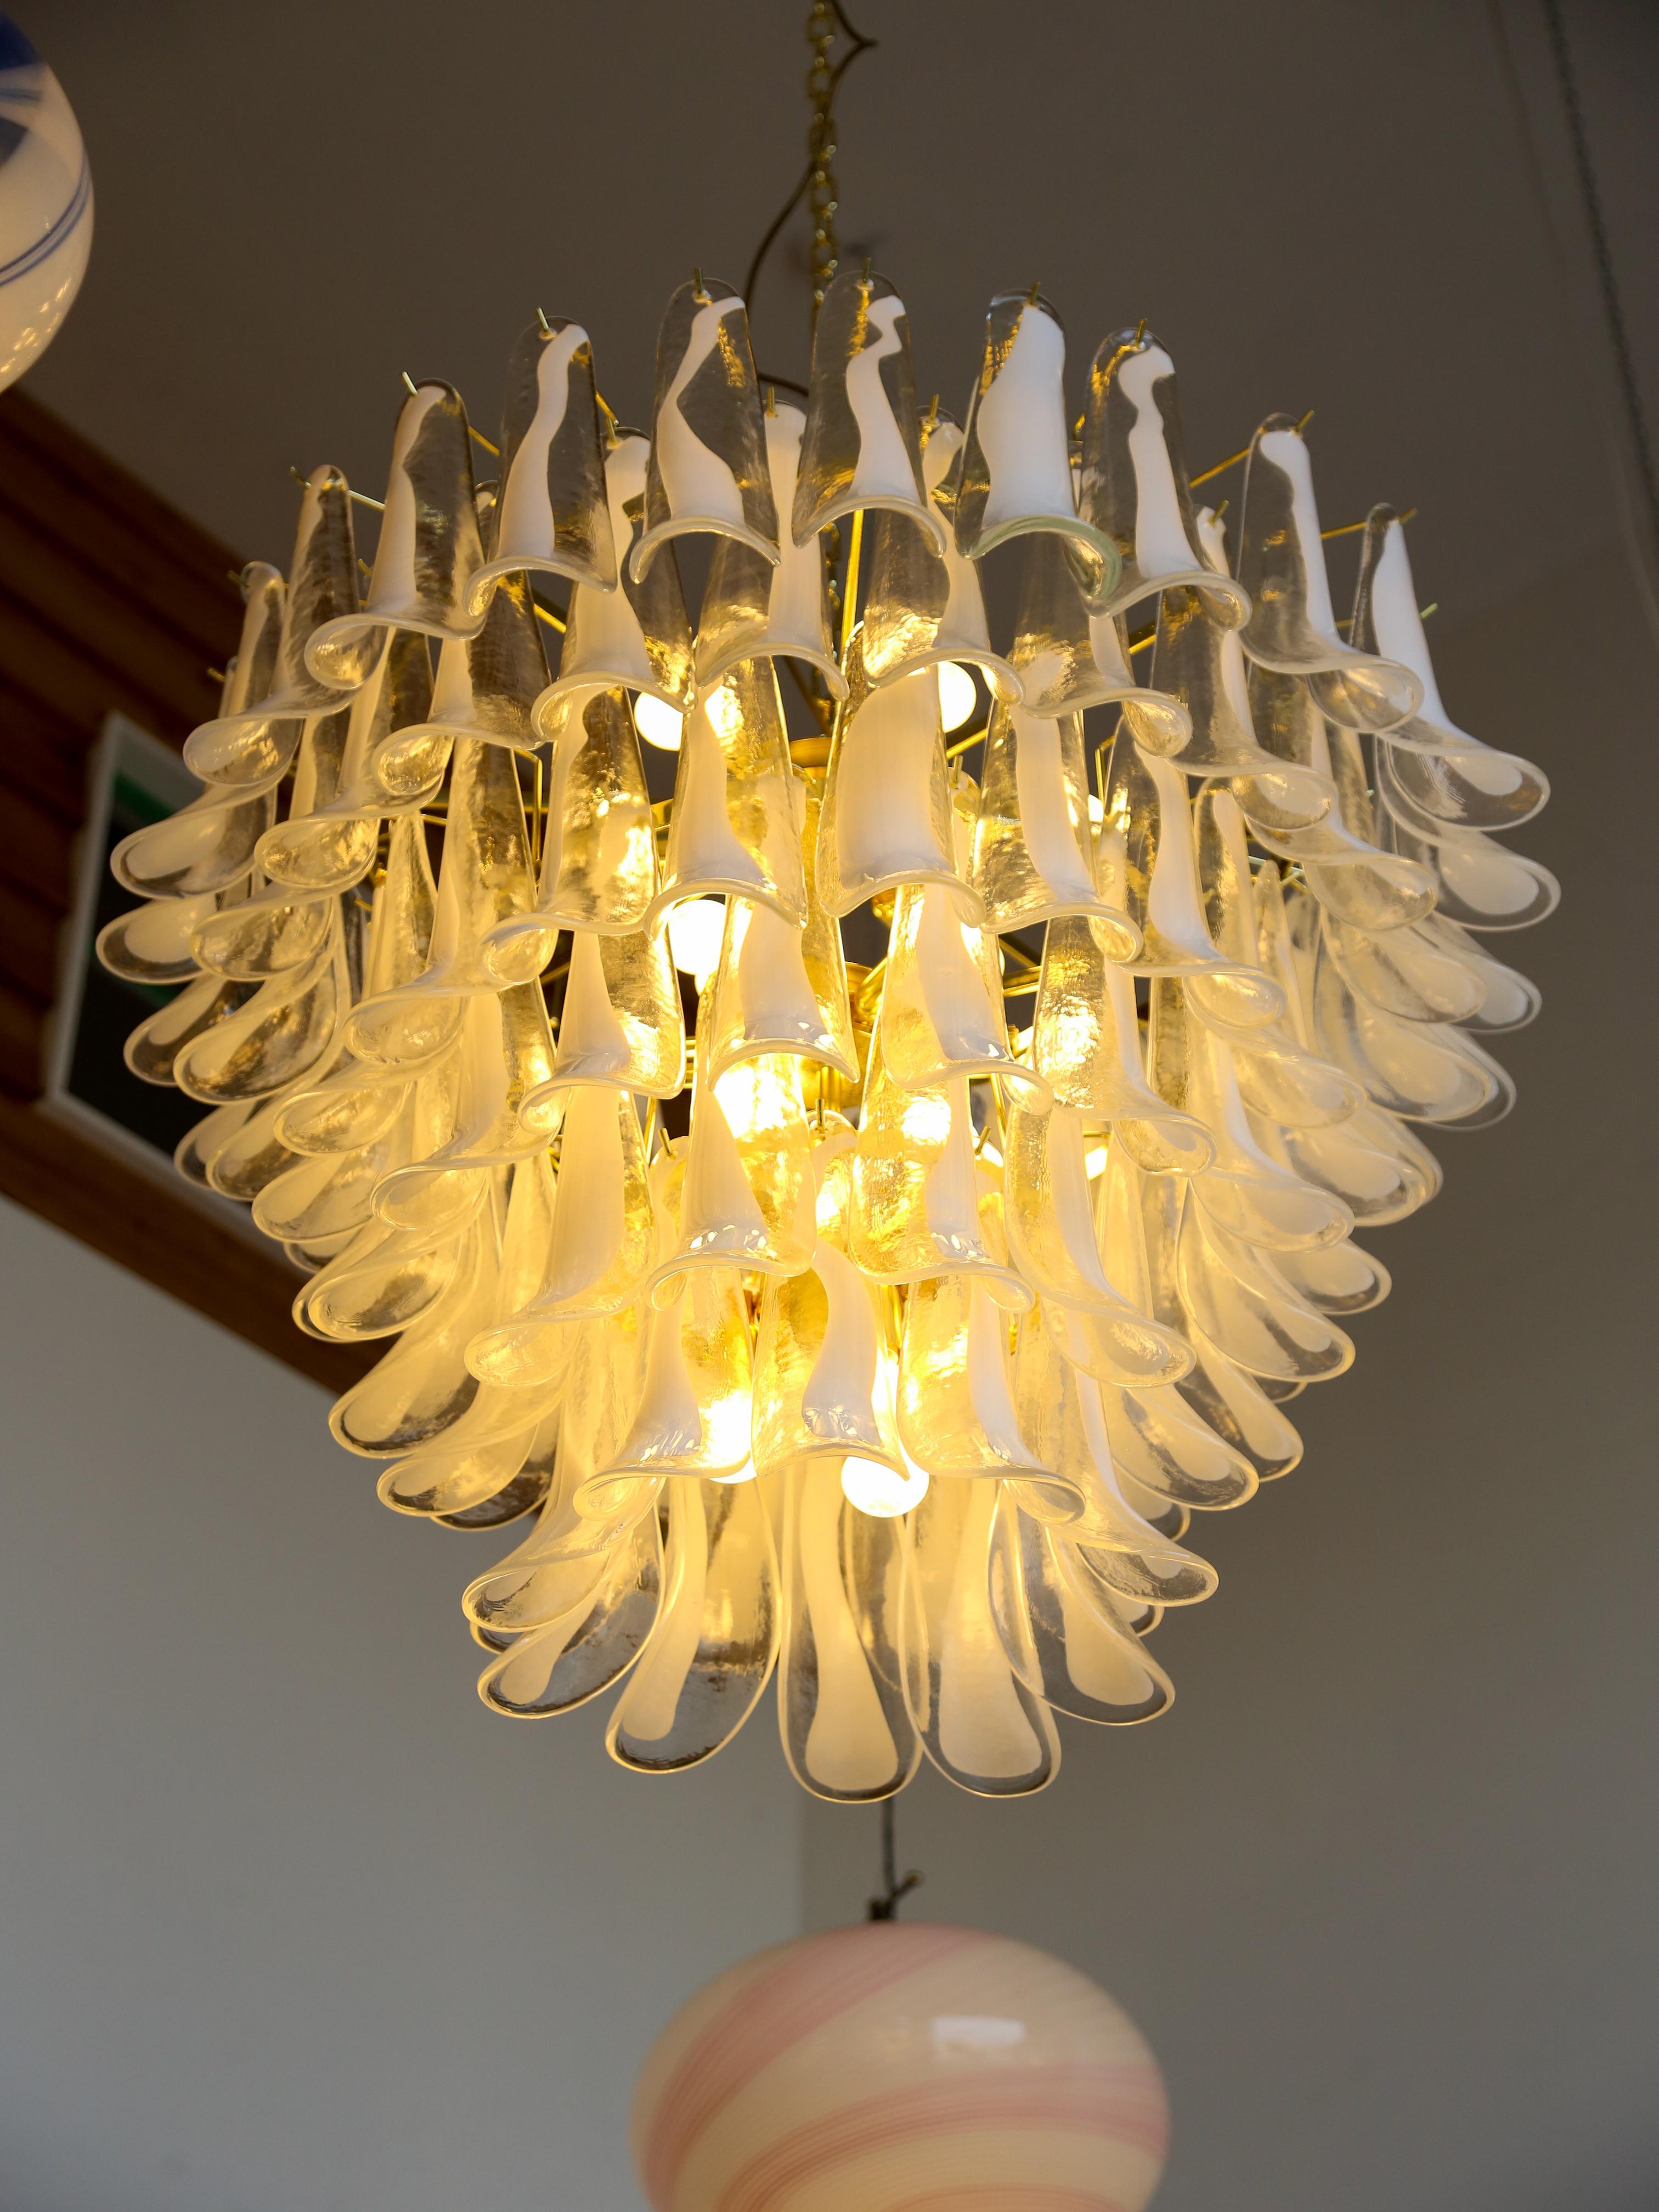 Statement piece in Murano white glass chandelier featuring a brass frame with six levels of saddles and eighteen internal light bulbs. ( total number of glass saddles is 103 )
This chandelier is a luxurious and elegant lighting fixture made but also